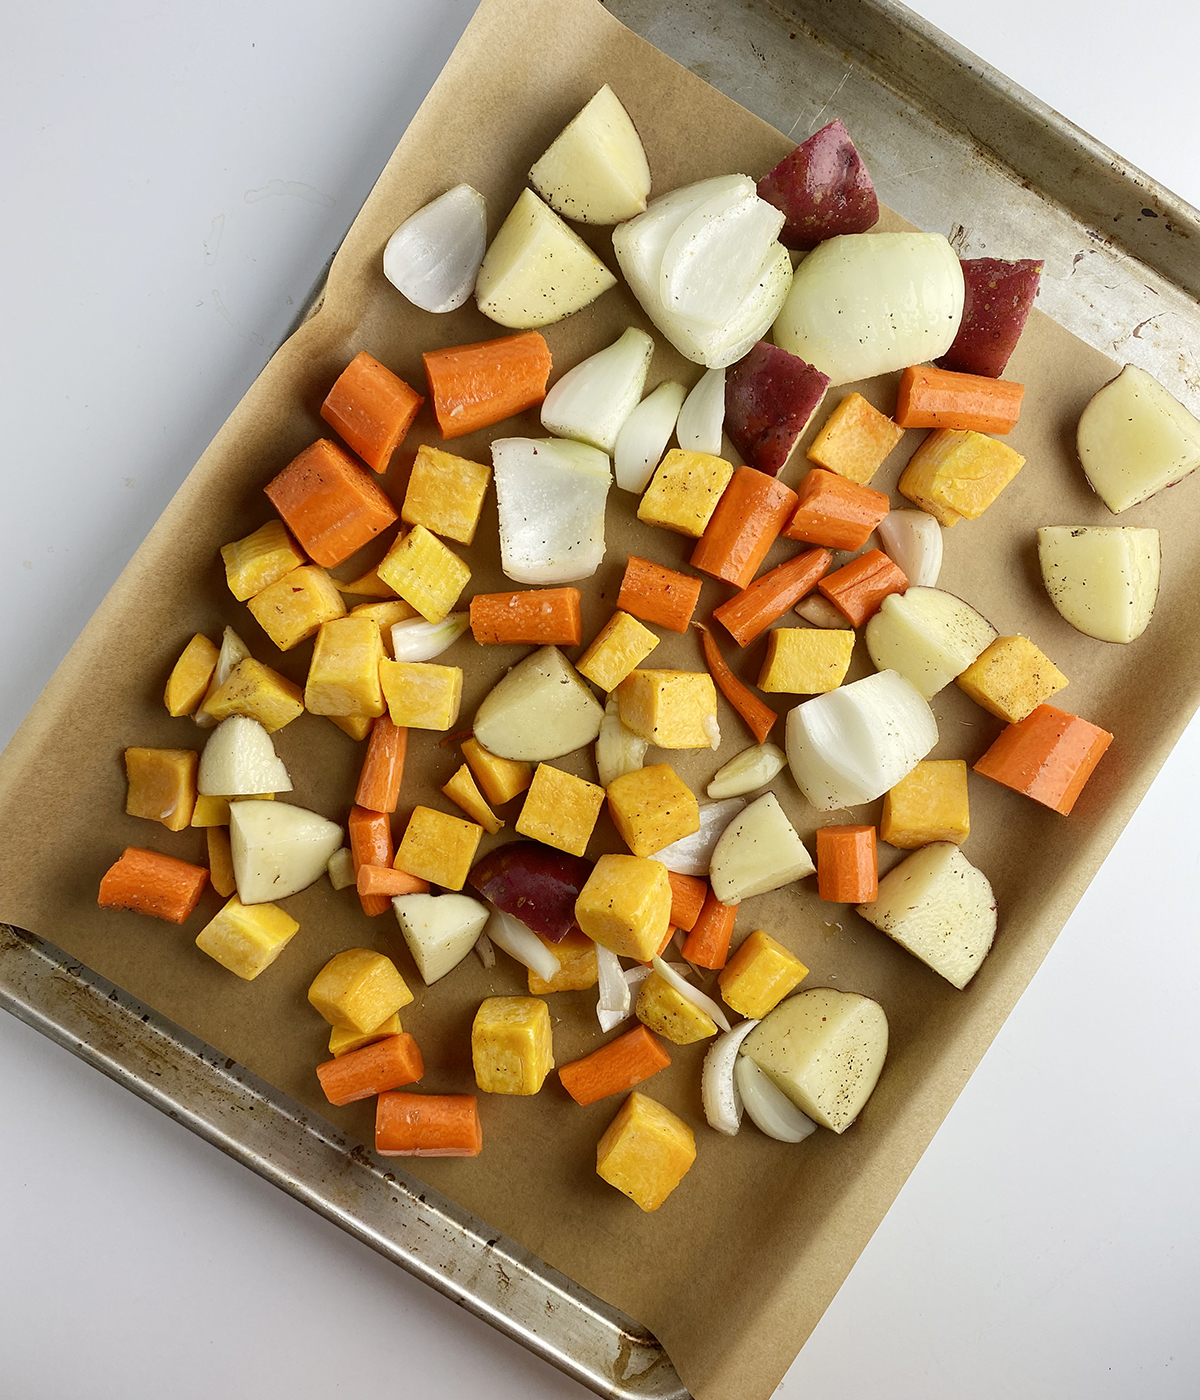 Uncooked fall vegetables on a baking pan lined with parchment.